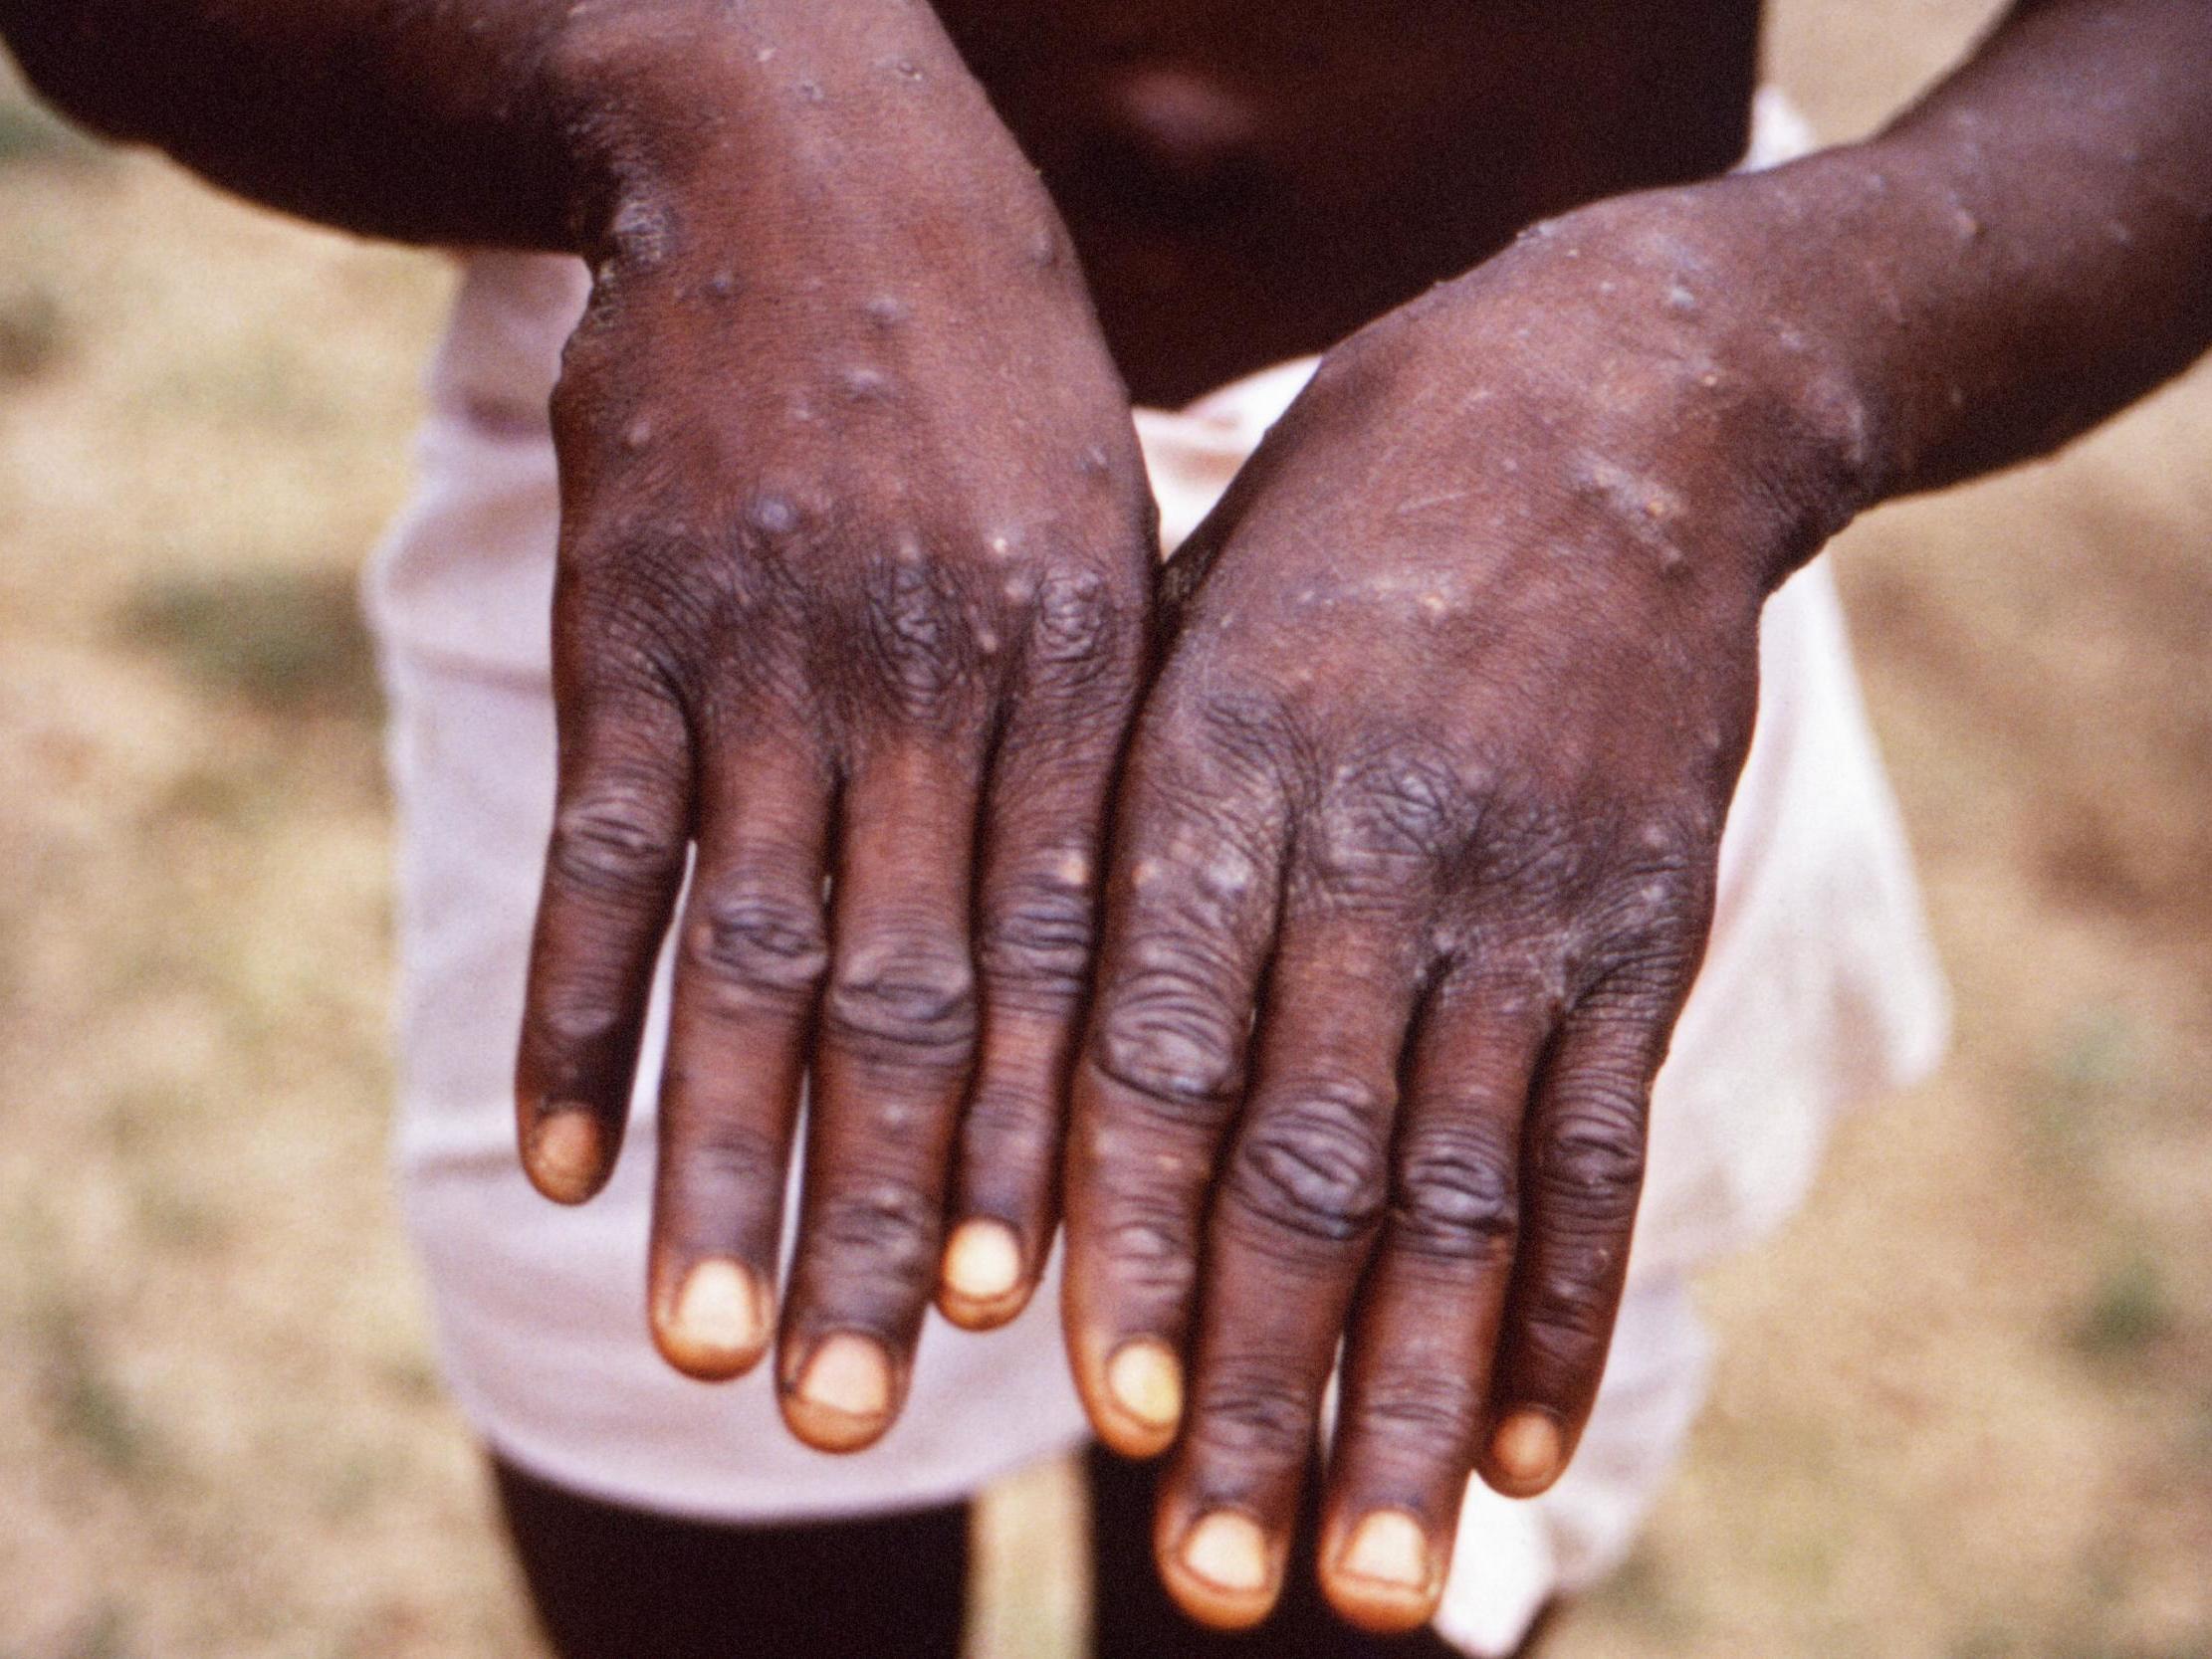 Monkeypox is a rare viral infection that does not spread easily between people